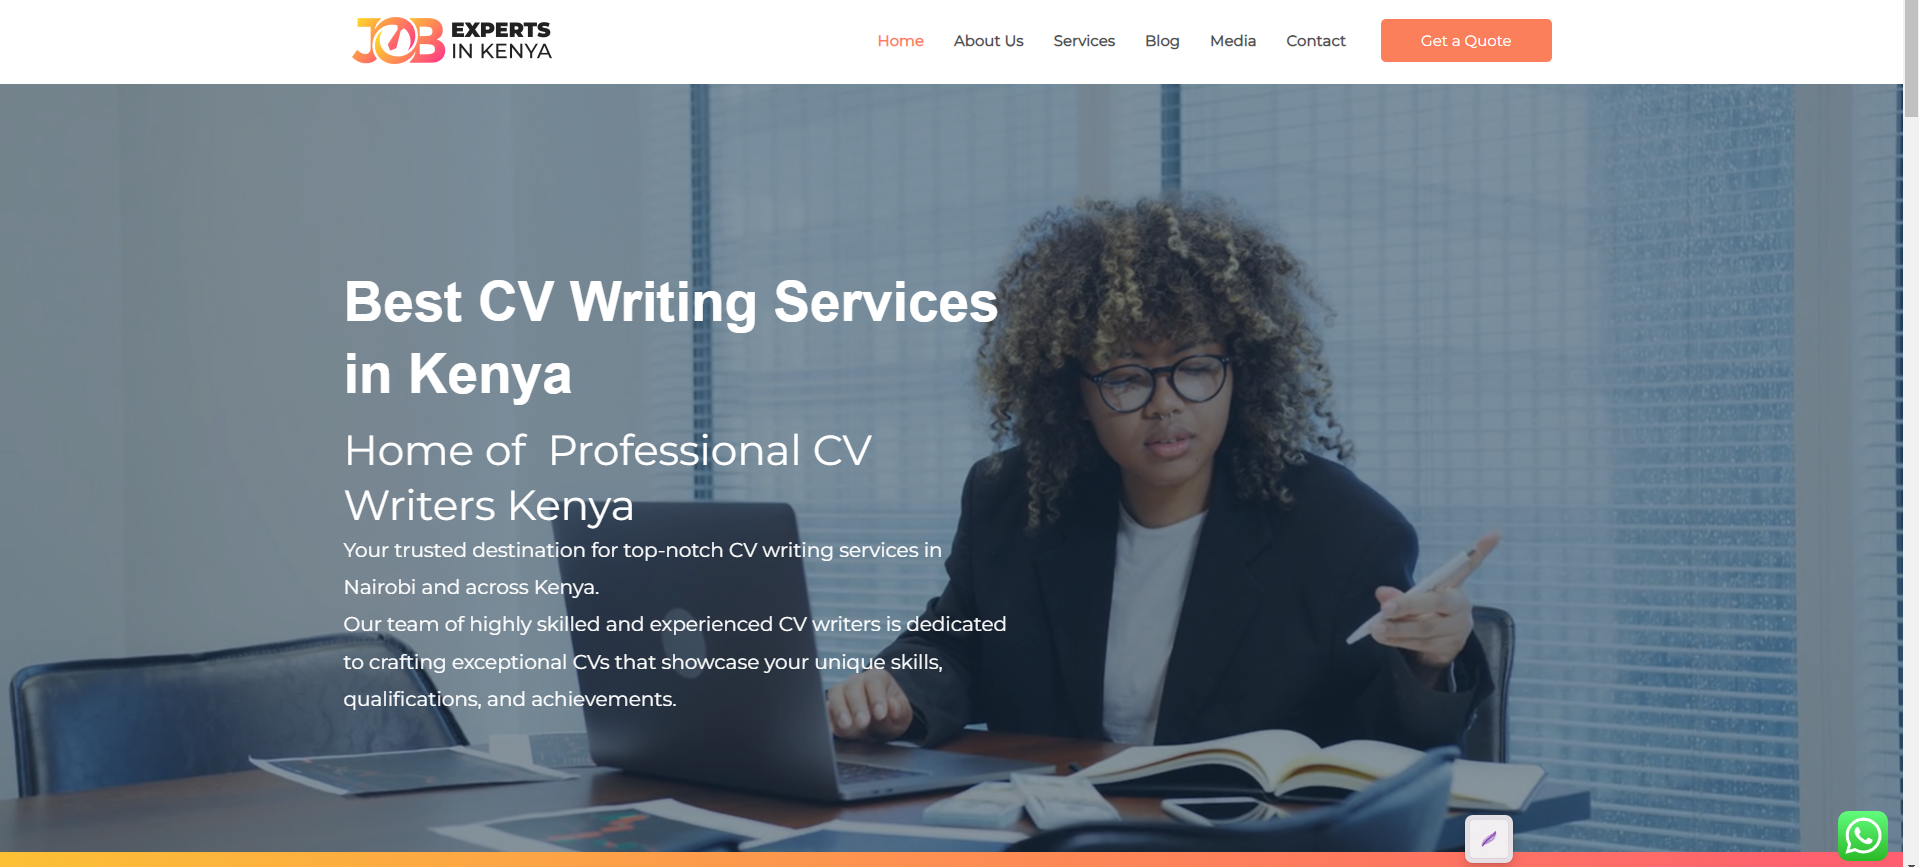 Where to Find Best CV Writing Services in Kenya